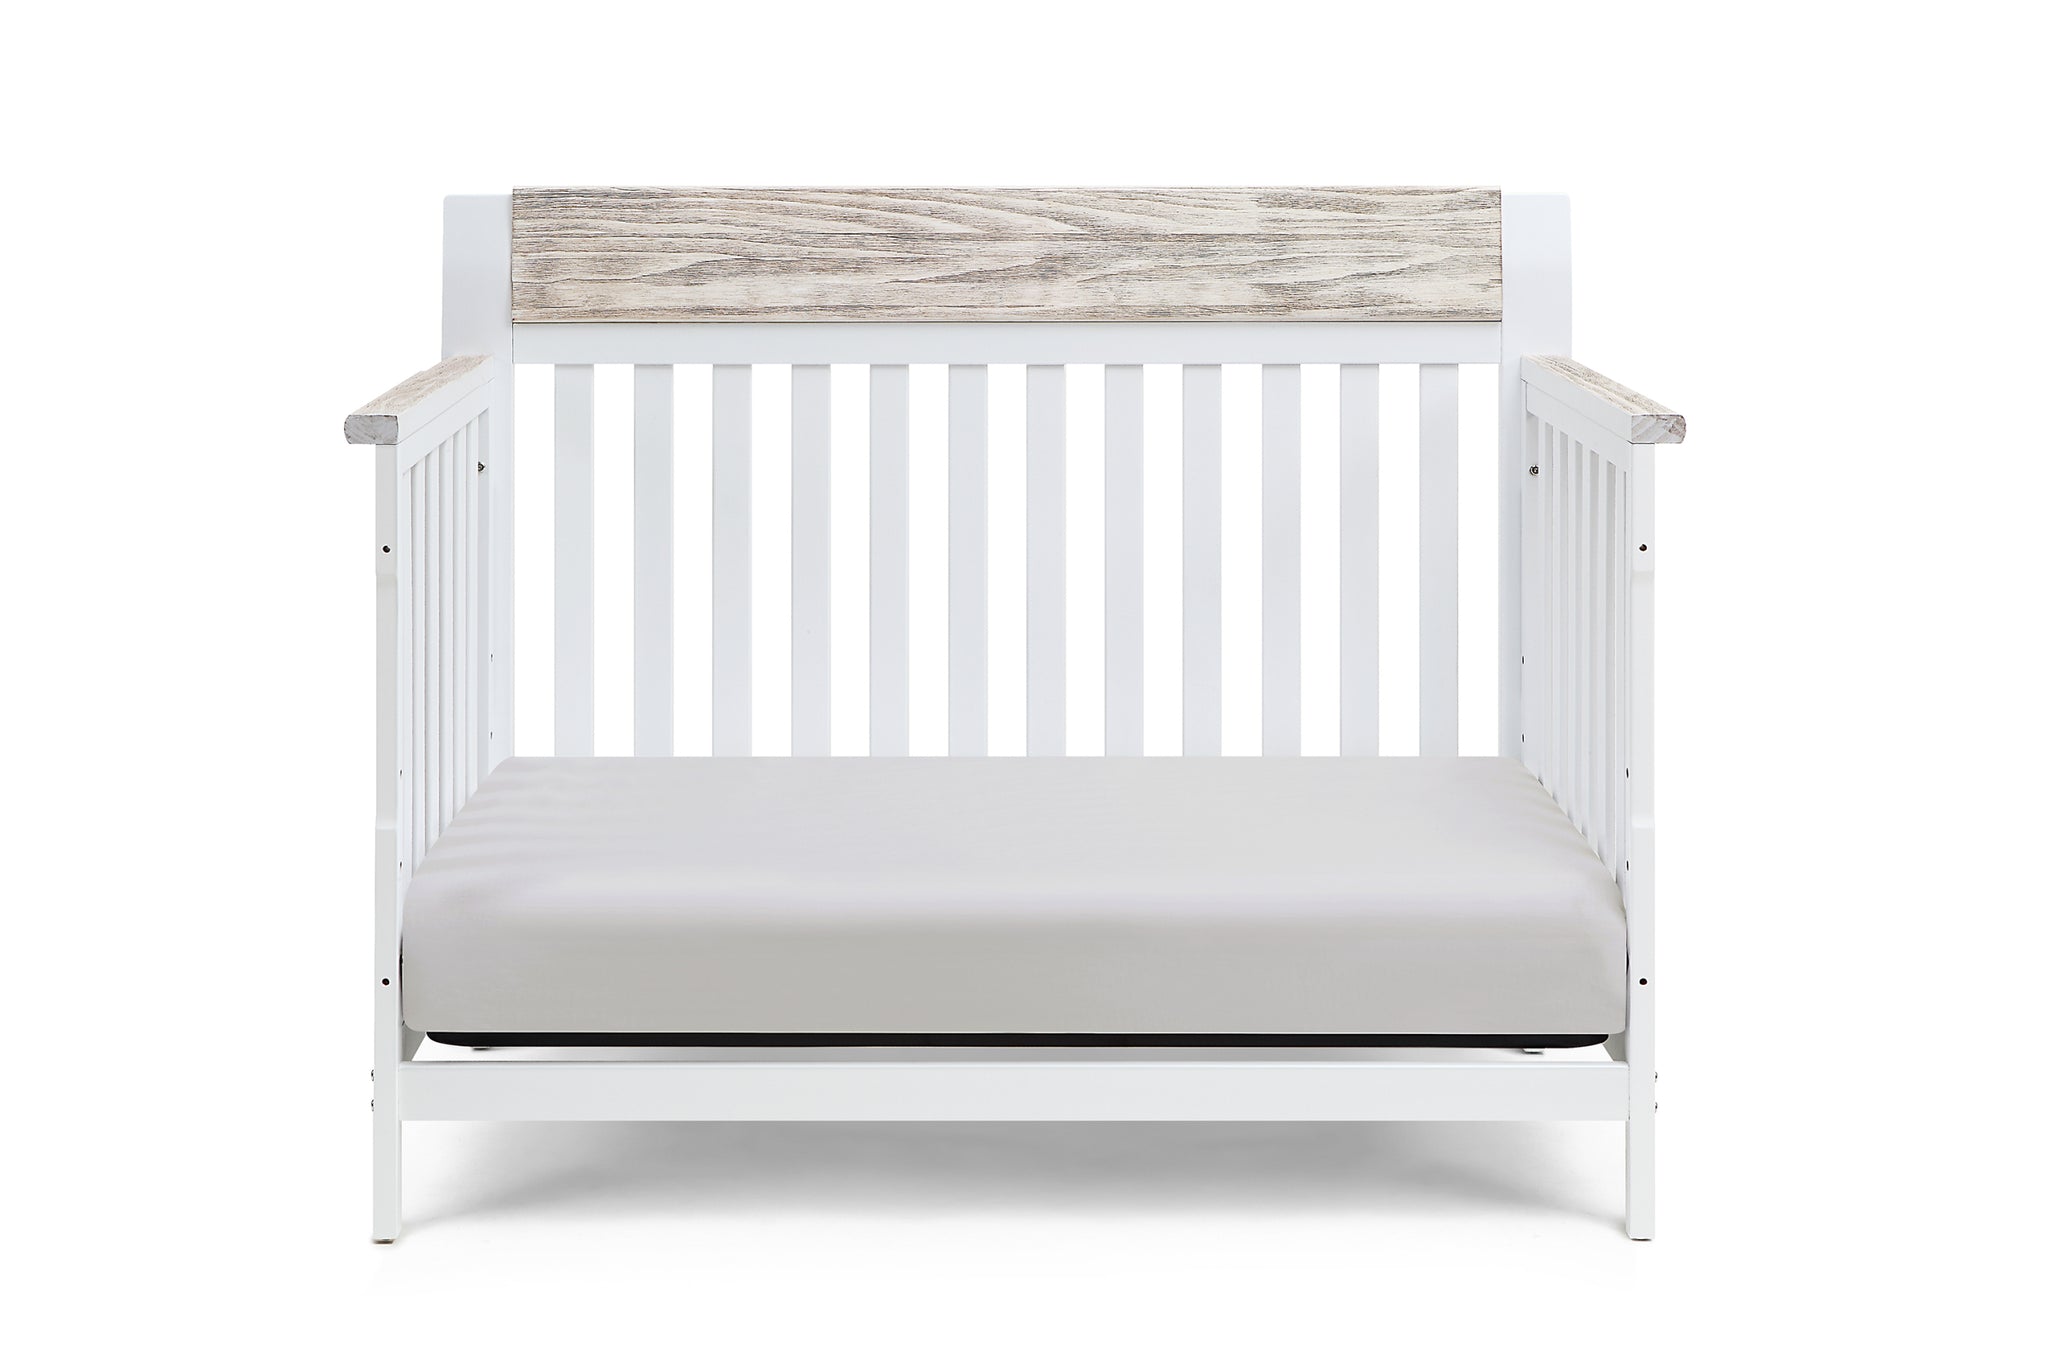 Hayes 4 in 1 Convertible Crib White Natural white-solid wood